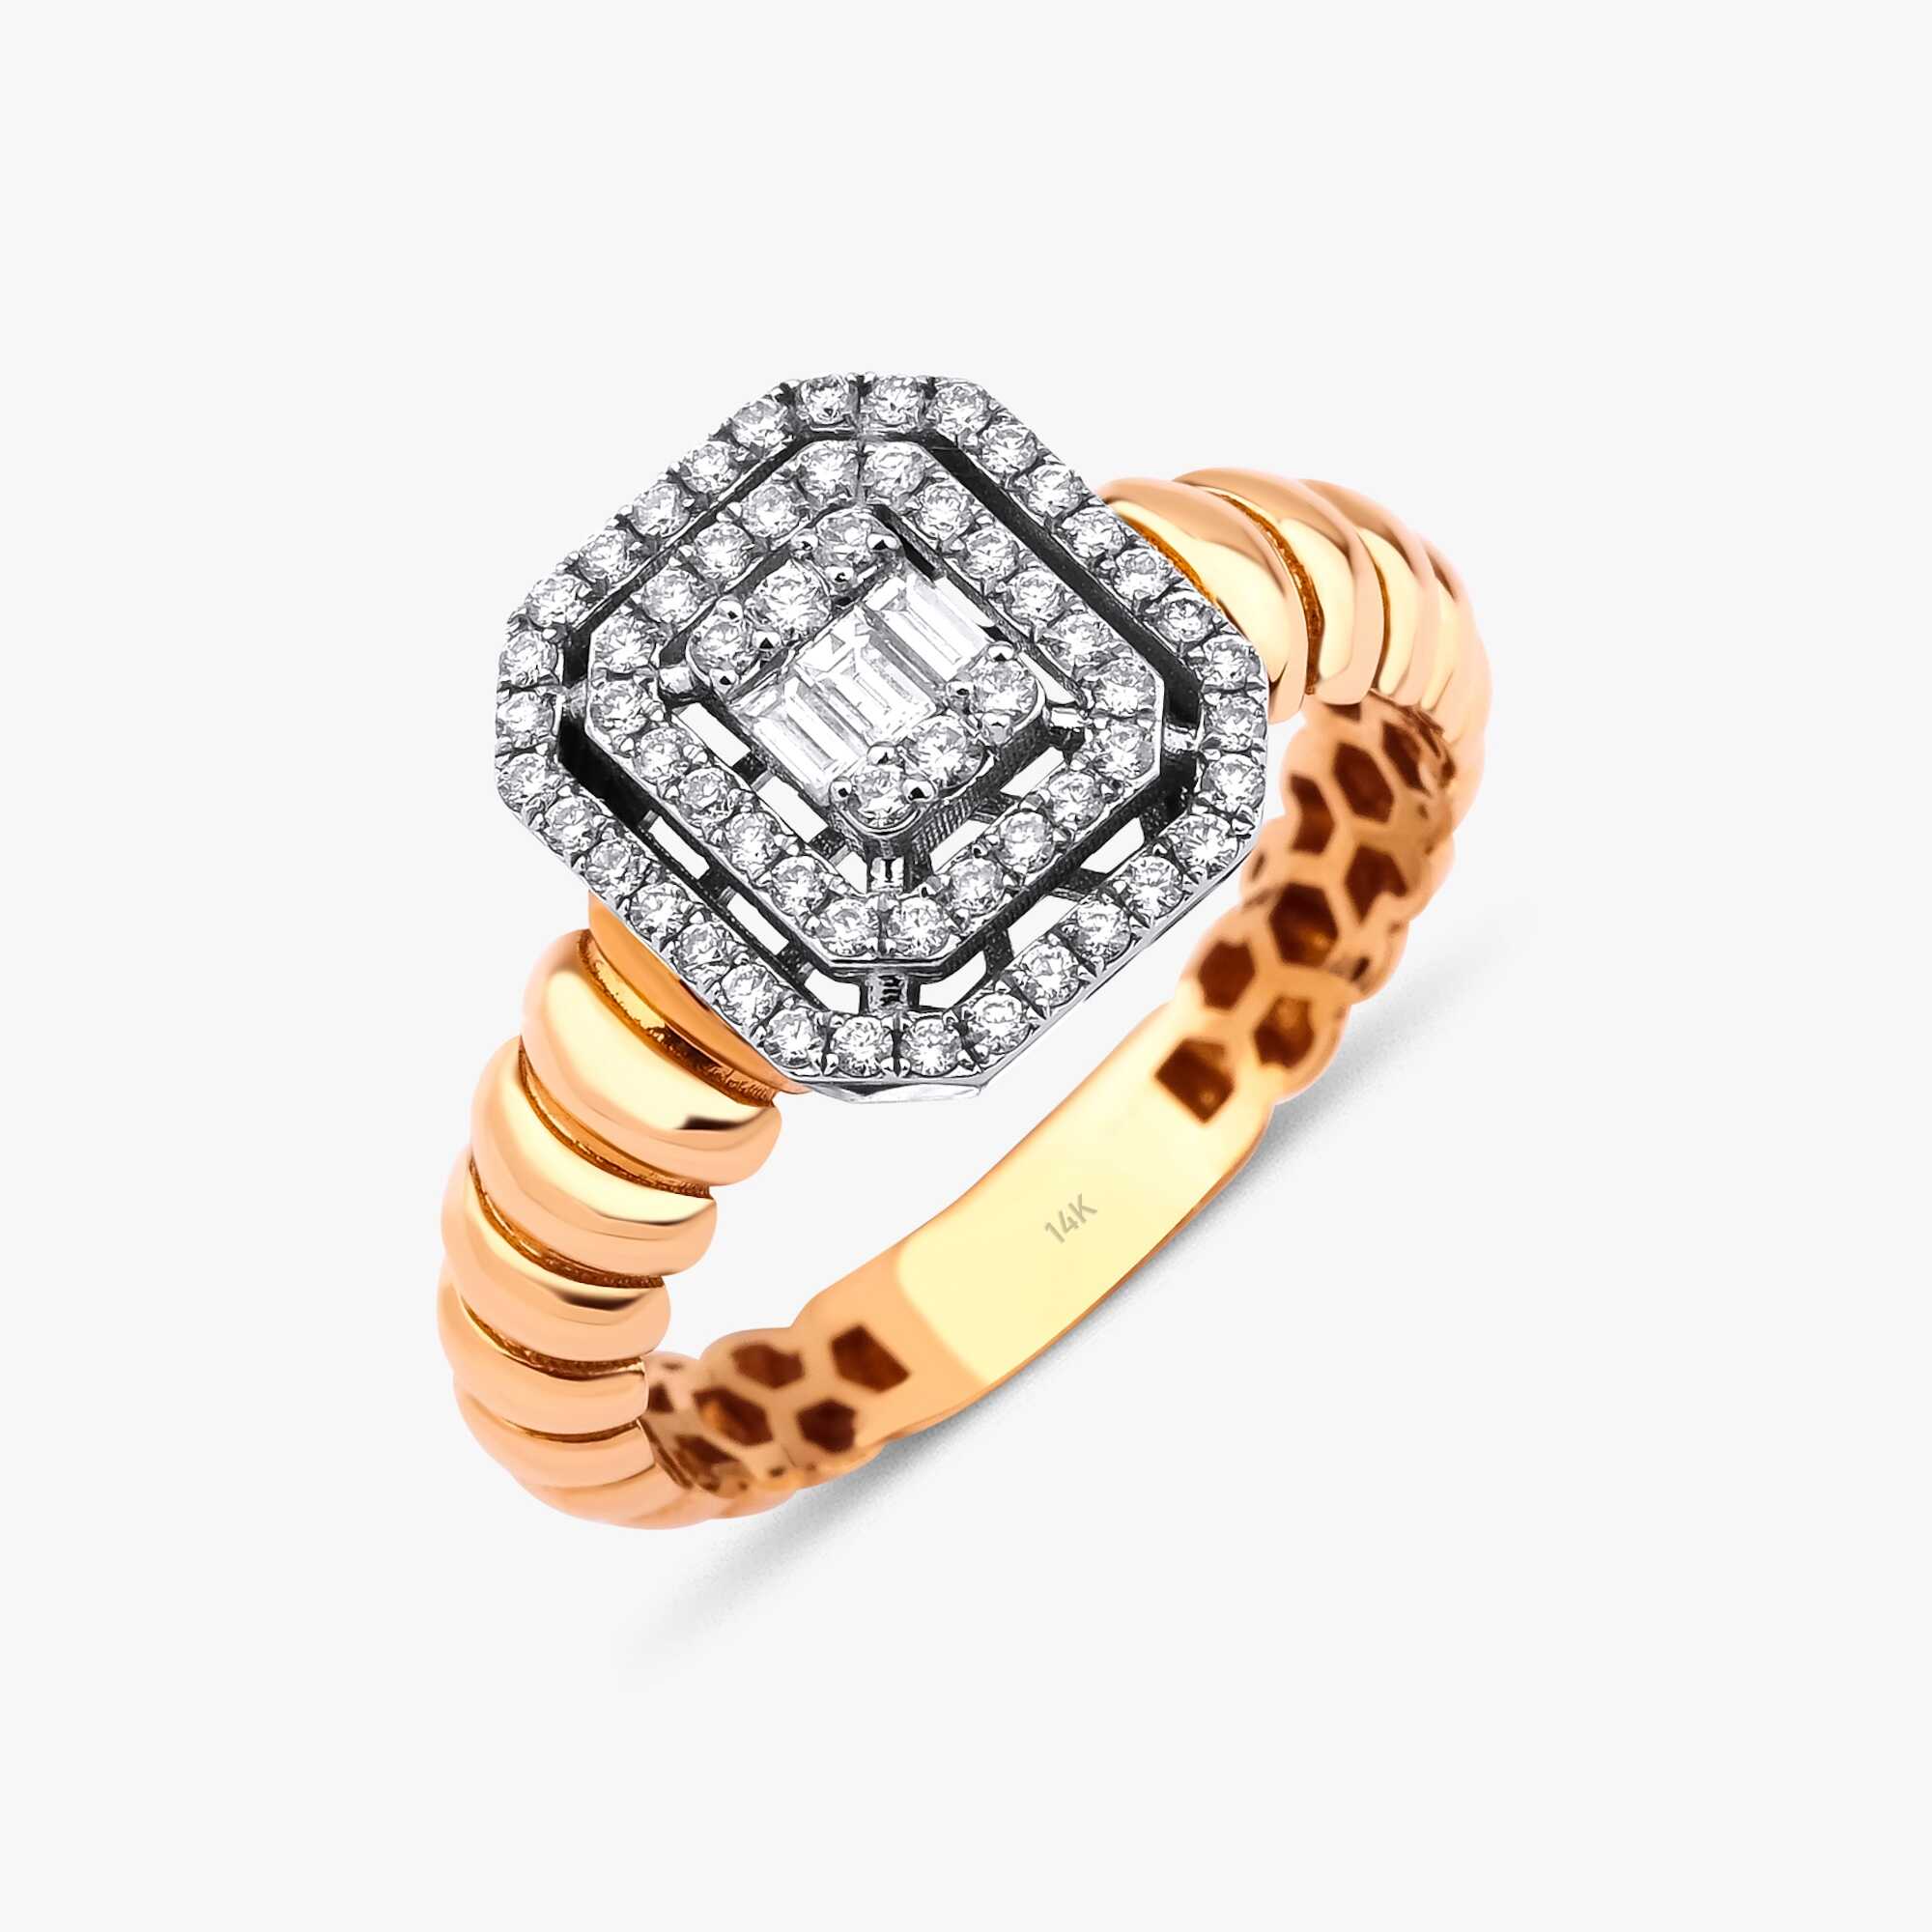 Double Halo Baguette Ring in 14K Gold